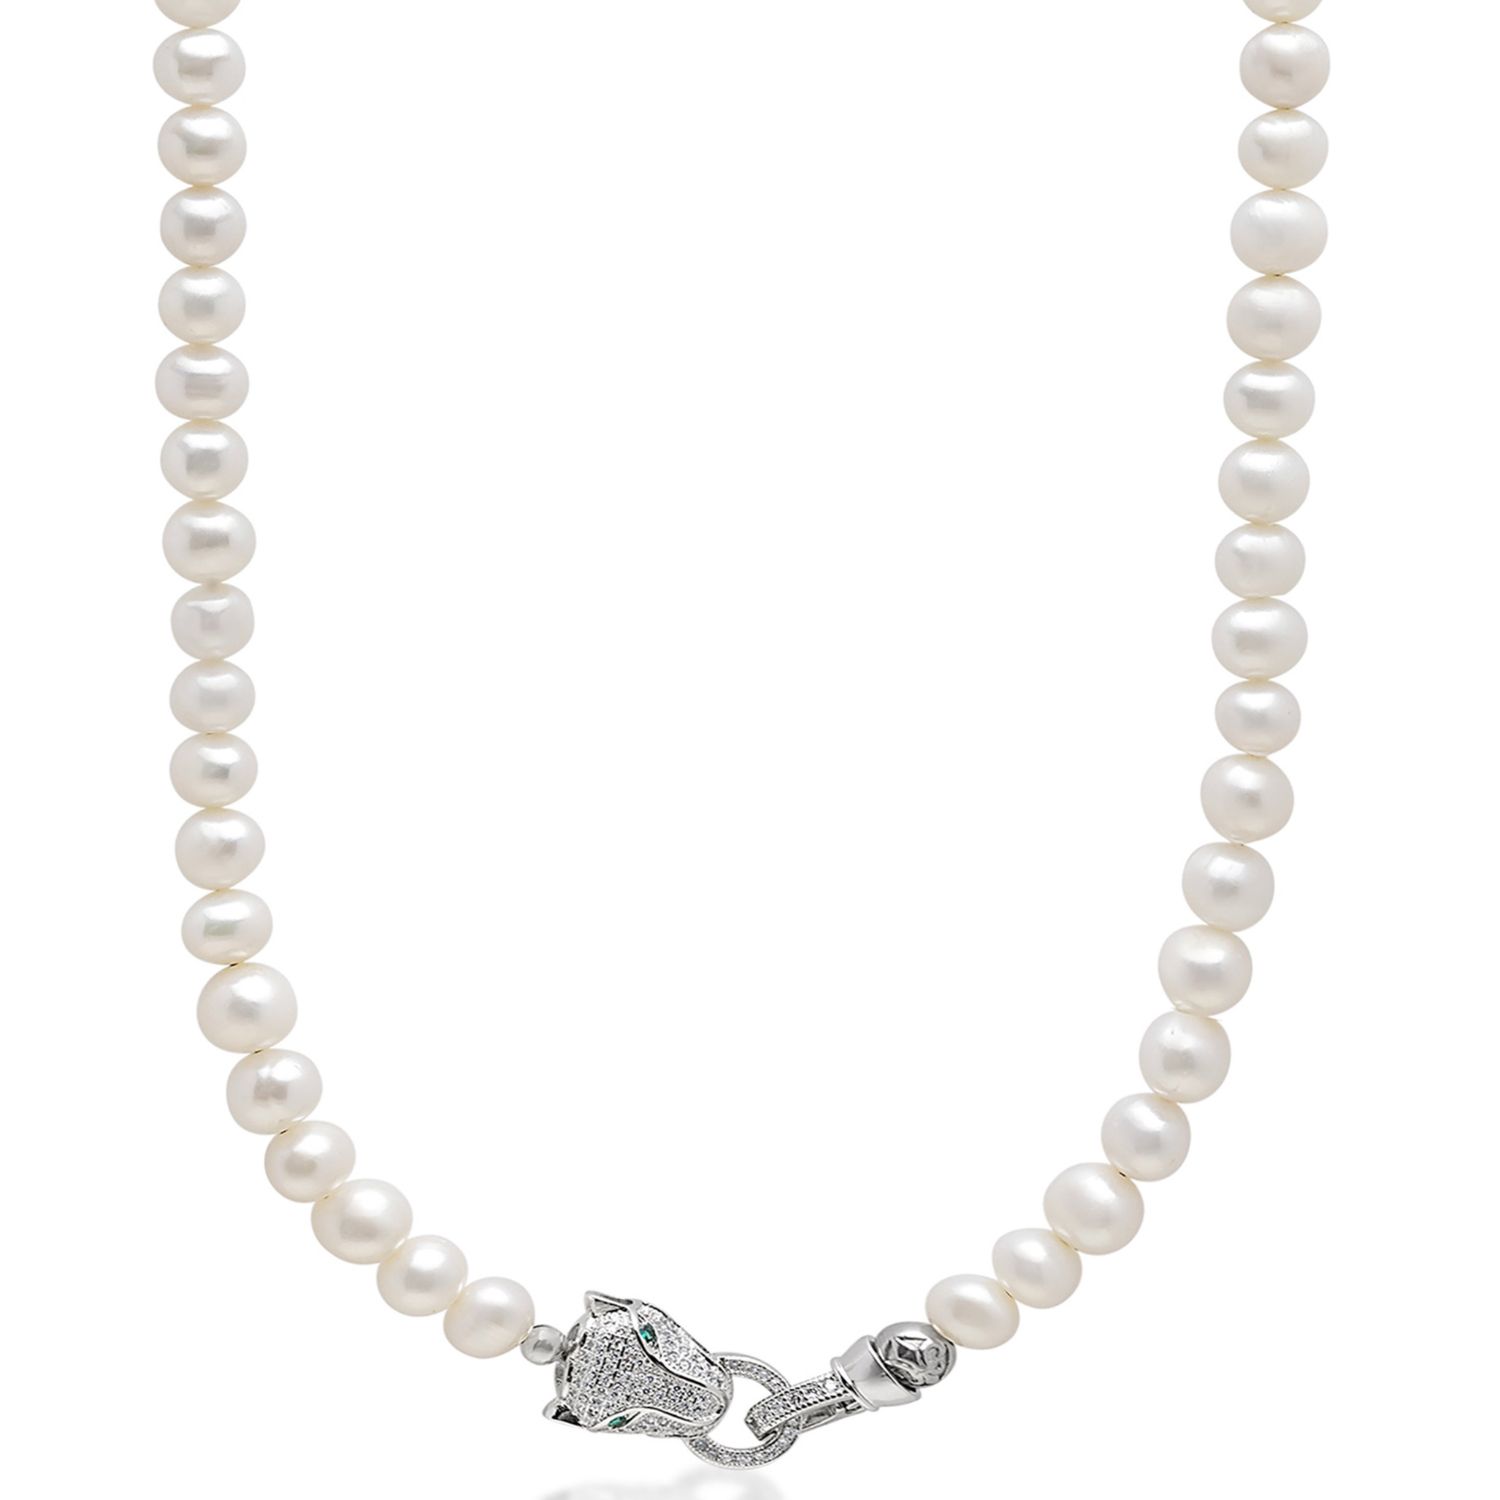 Nialaya Men's White Pearl Necklace With Silver Panther Head Lock